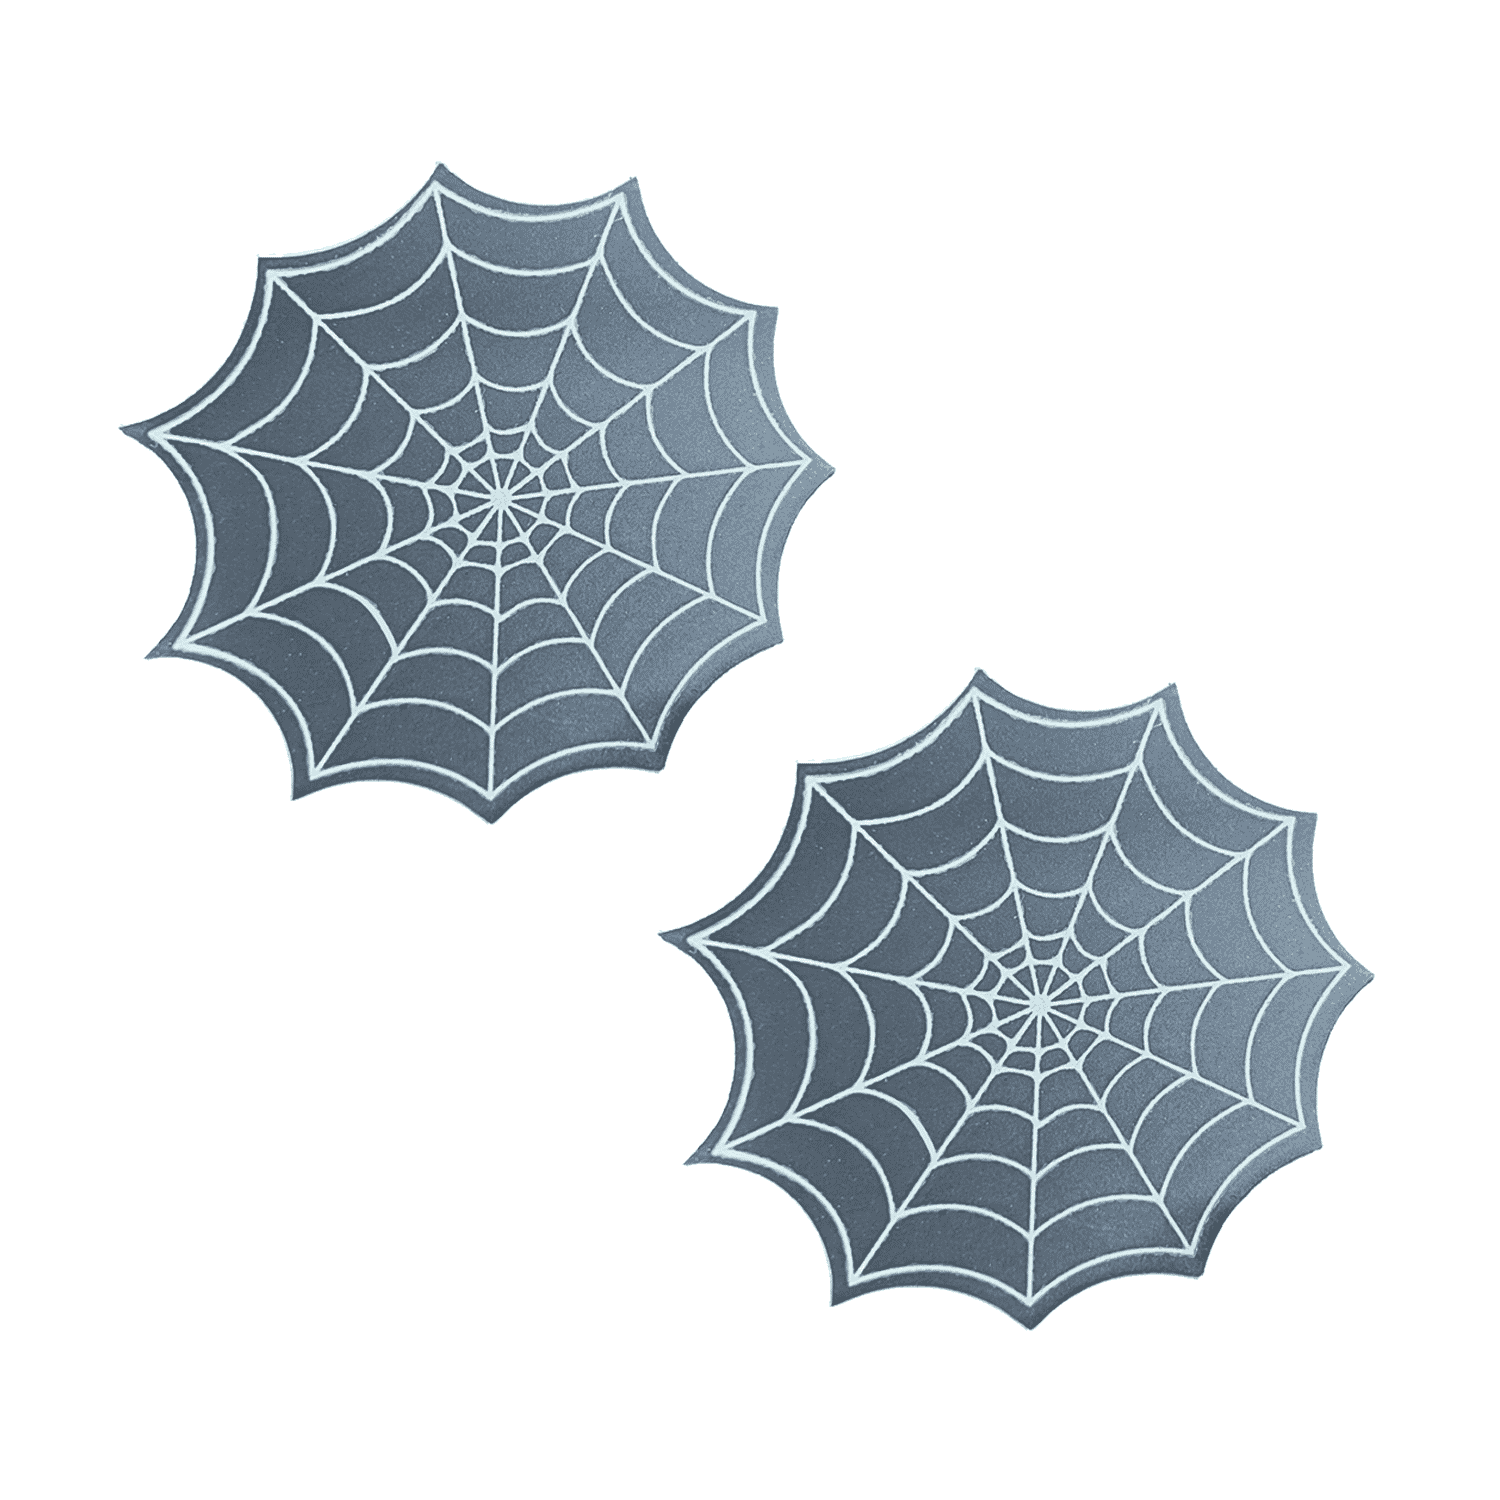 Reflective Spider Web Nipple Cover Pasties 2